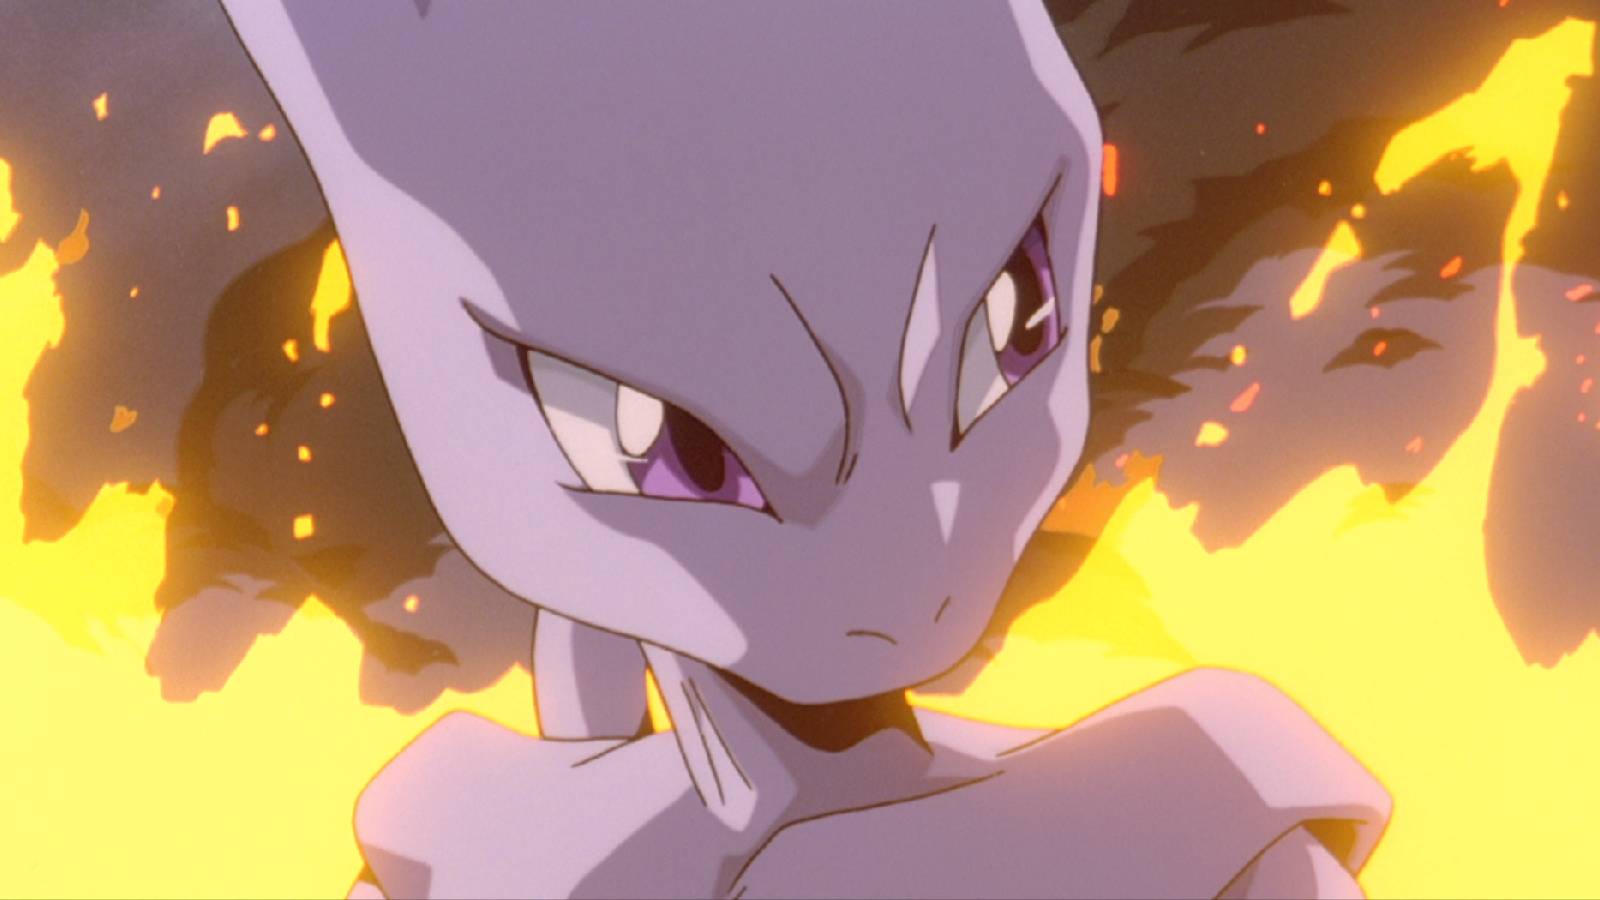 The Legendary Pokemon Mewtwo stands in the centre of the frame, with flames eminating behind it